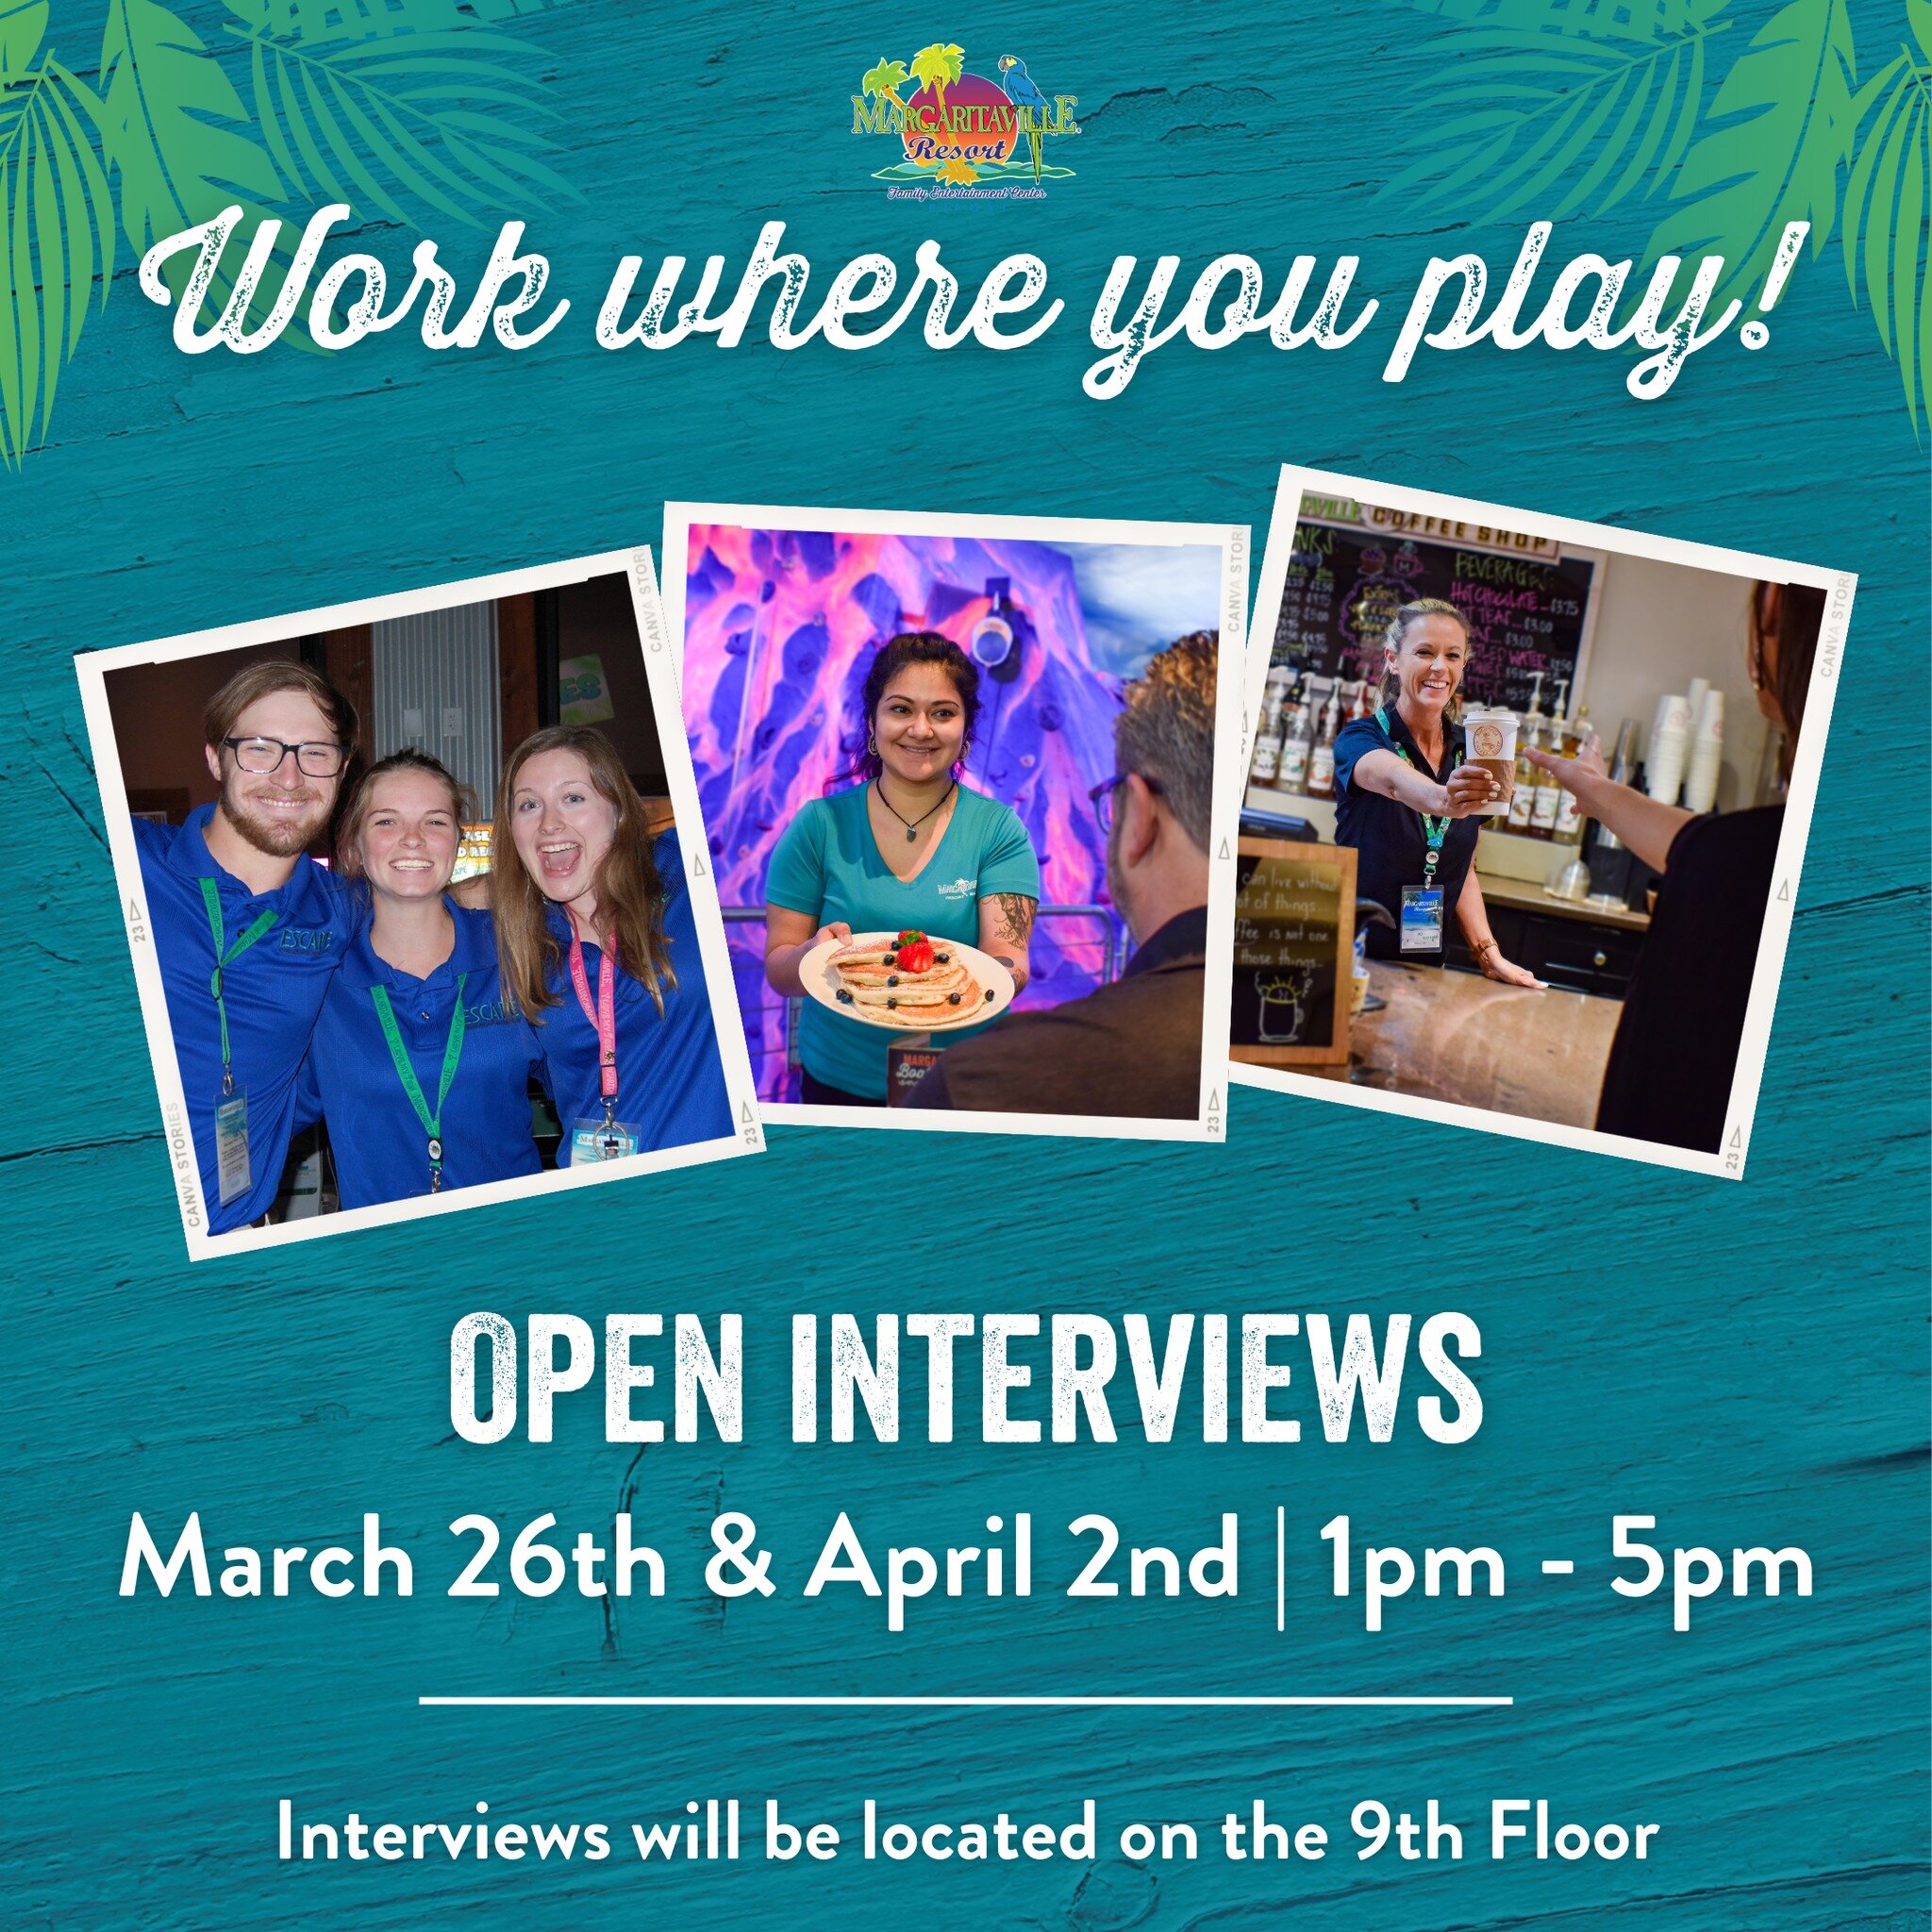 Your Next Chapter Awaits at Margaritaville Resort Biloxi! 🌴 Join us for open interviews on March 26th and April 2nd!

Bring your A-game and dress to reflect the awesome individual you are! 

Put your application in today and skip the line when you a